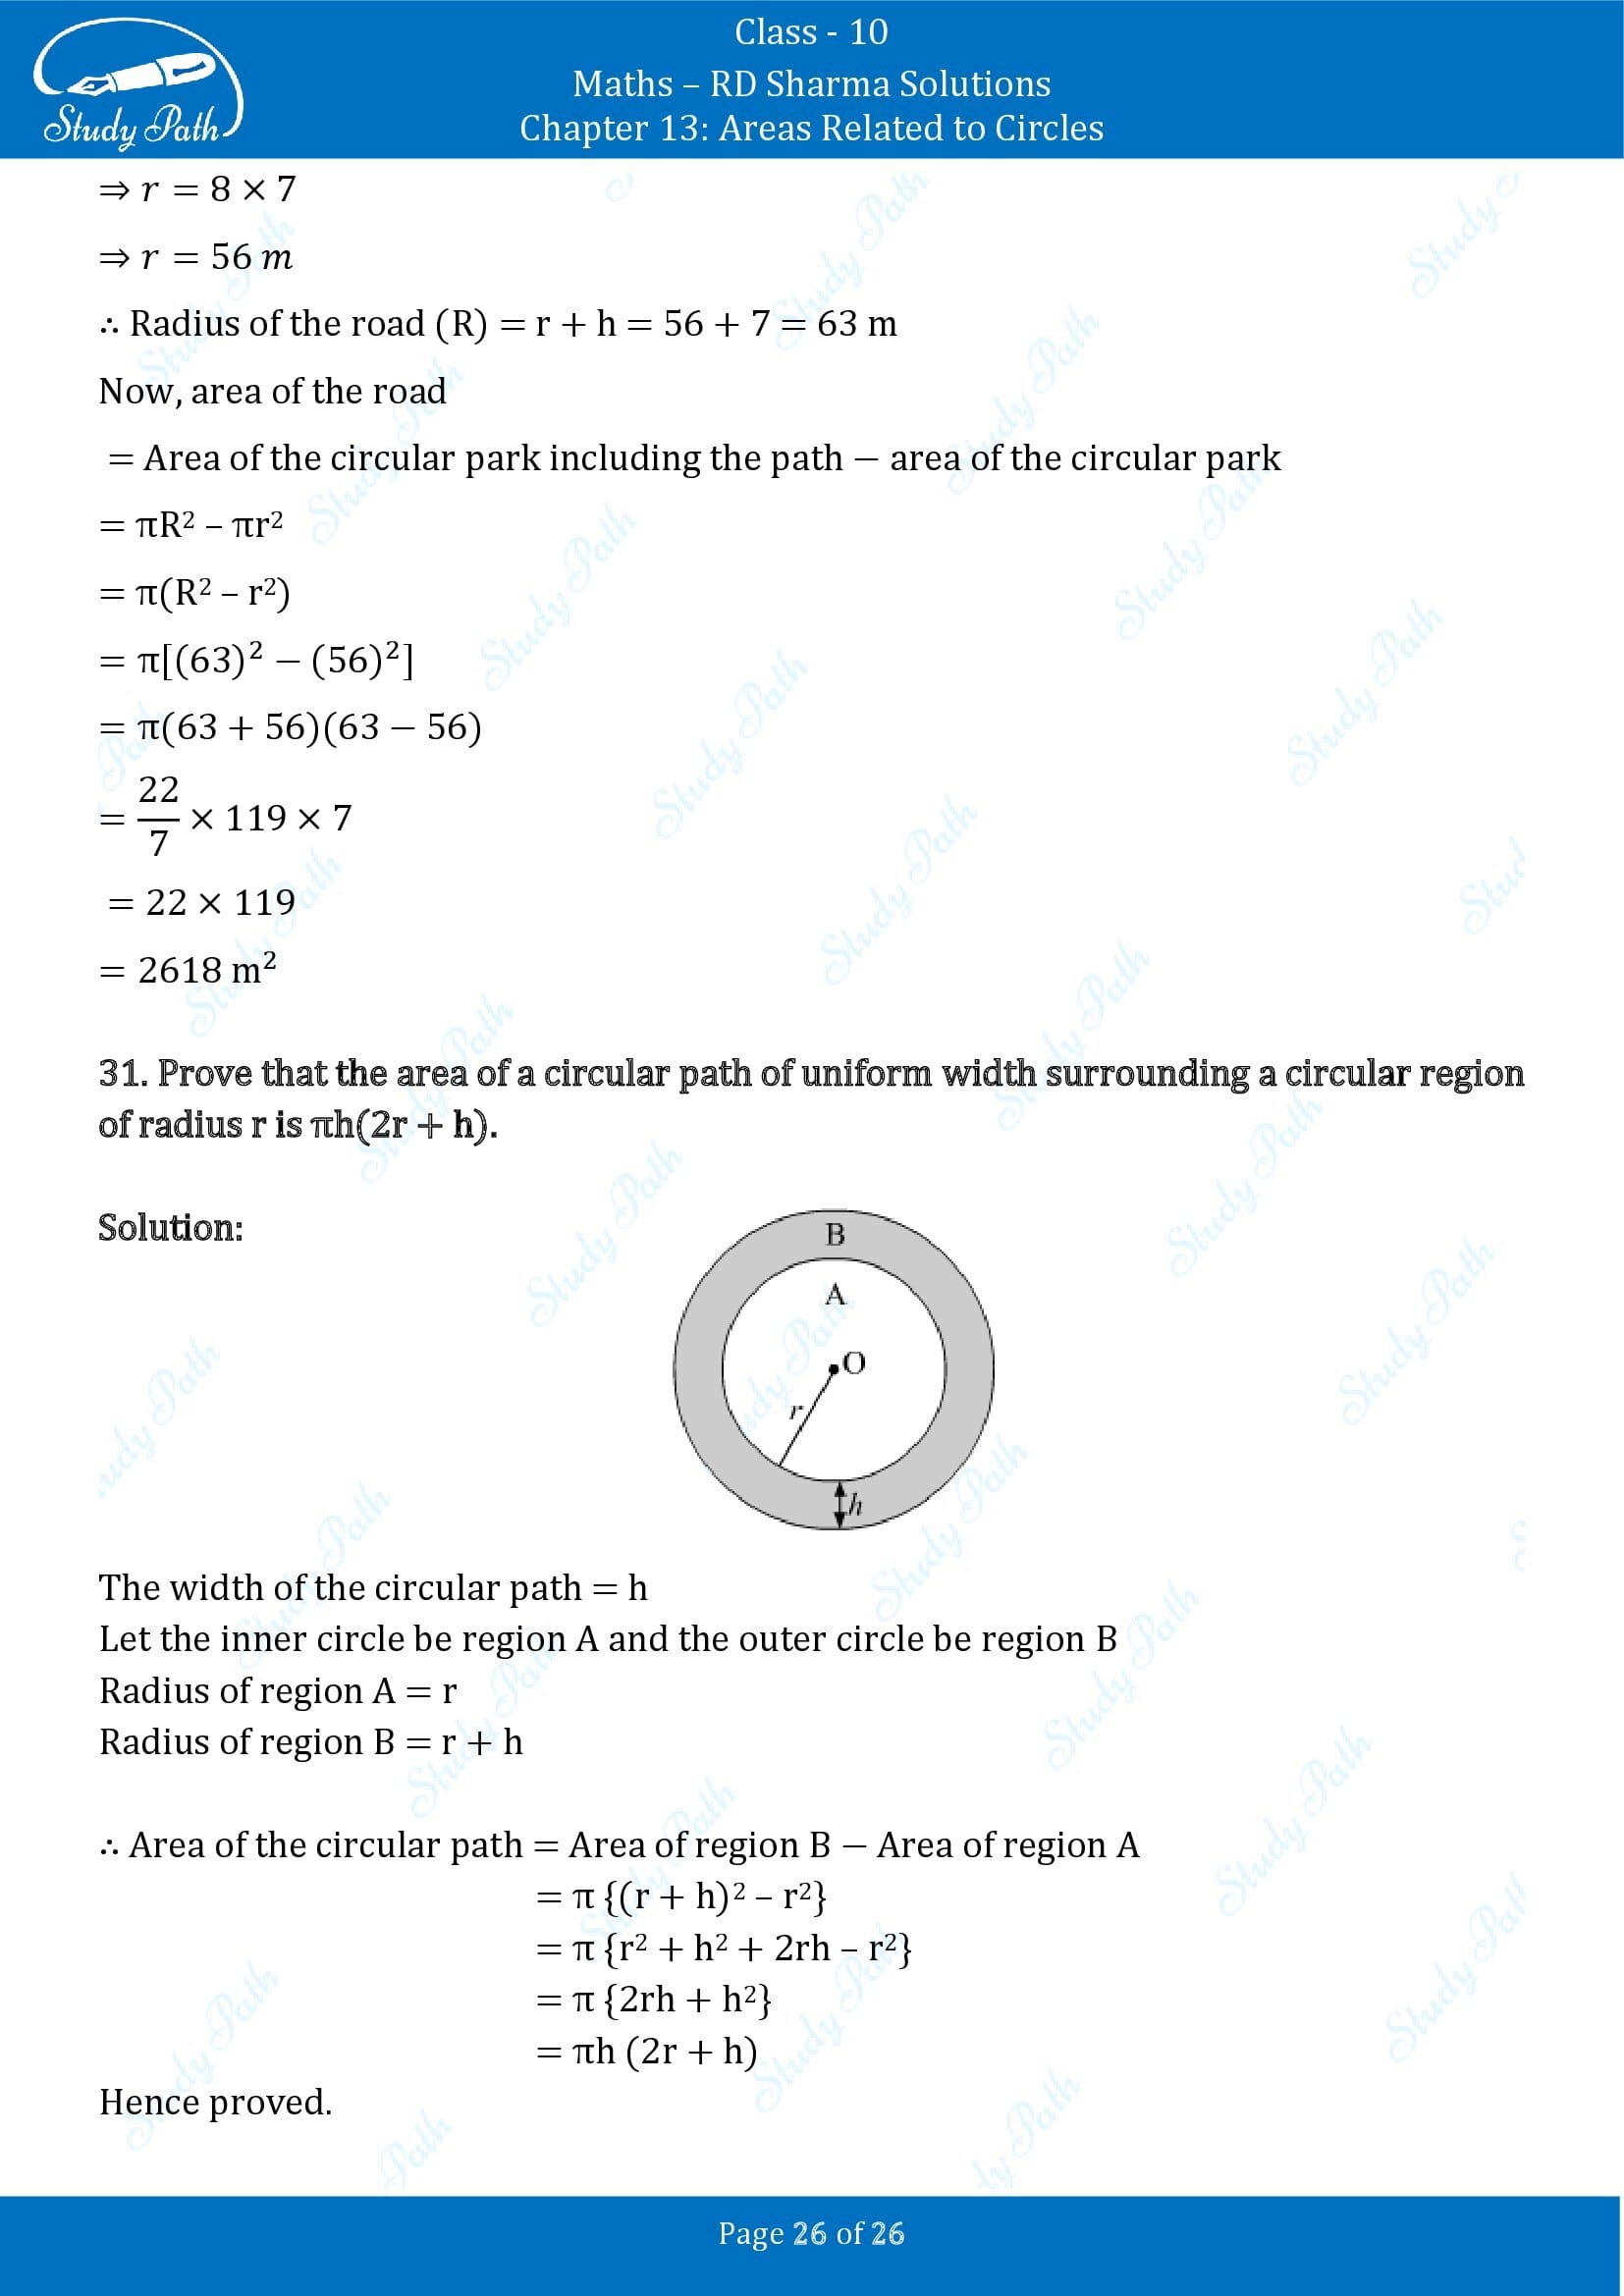 RD Sharma Solutions Class 10 Chapter 13 Areas Related to Circles Exercise 13.1 00026